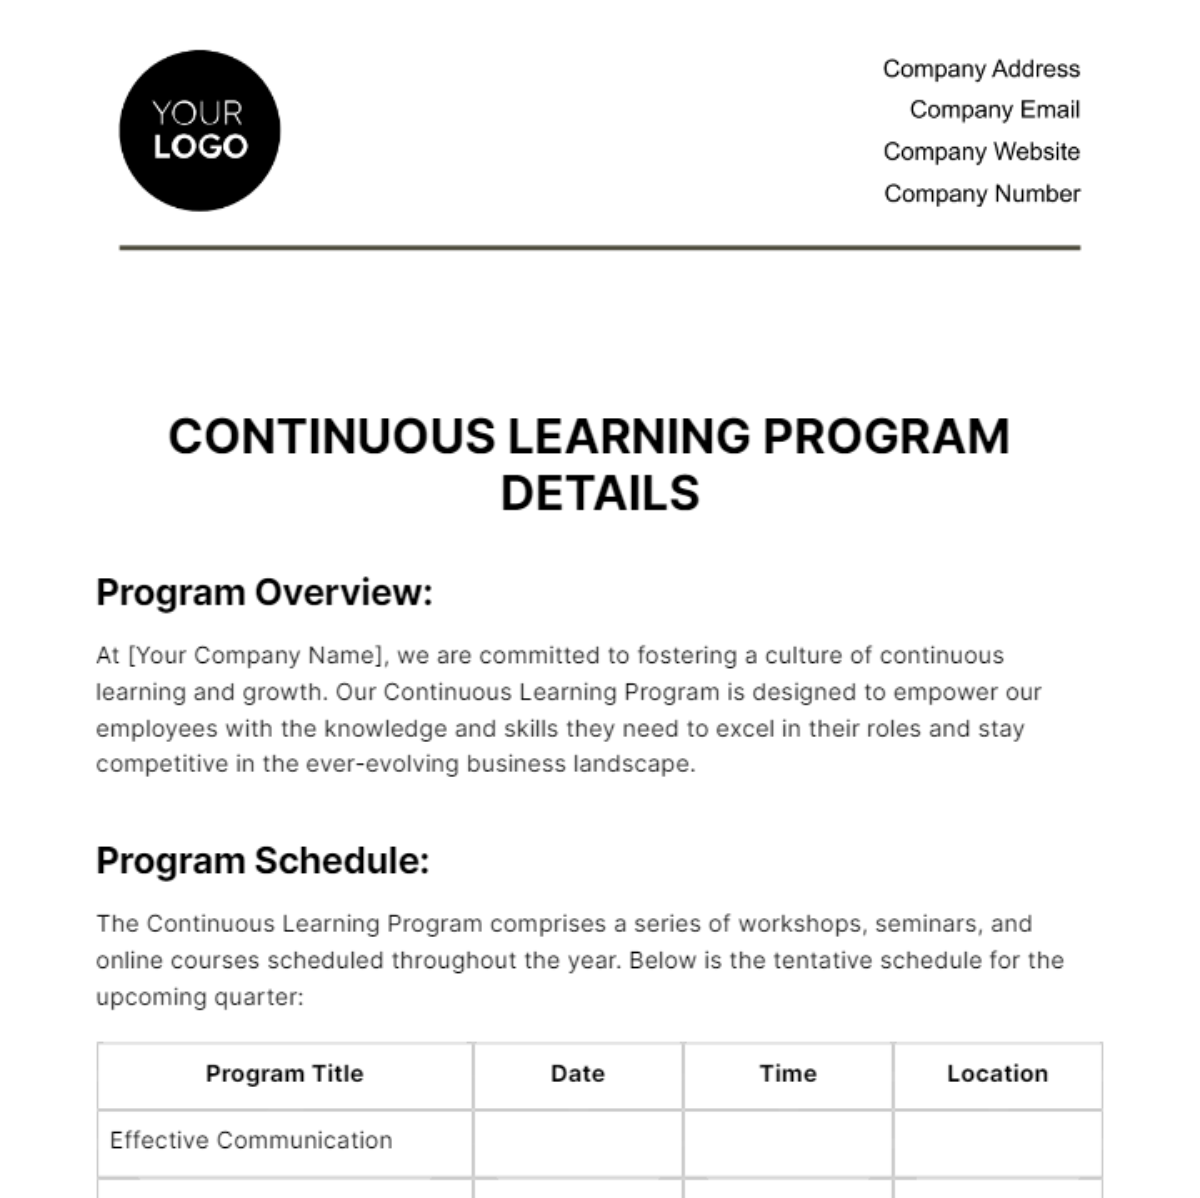 Free Continuous Learning Program Details HR Template